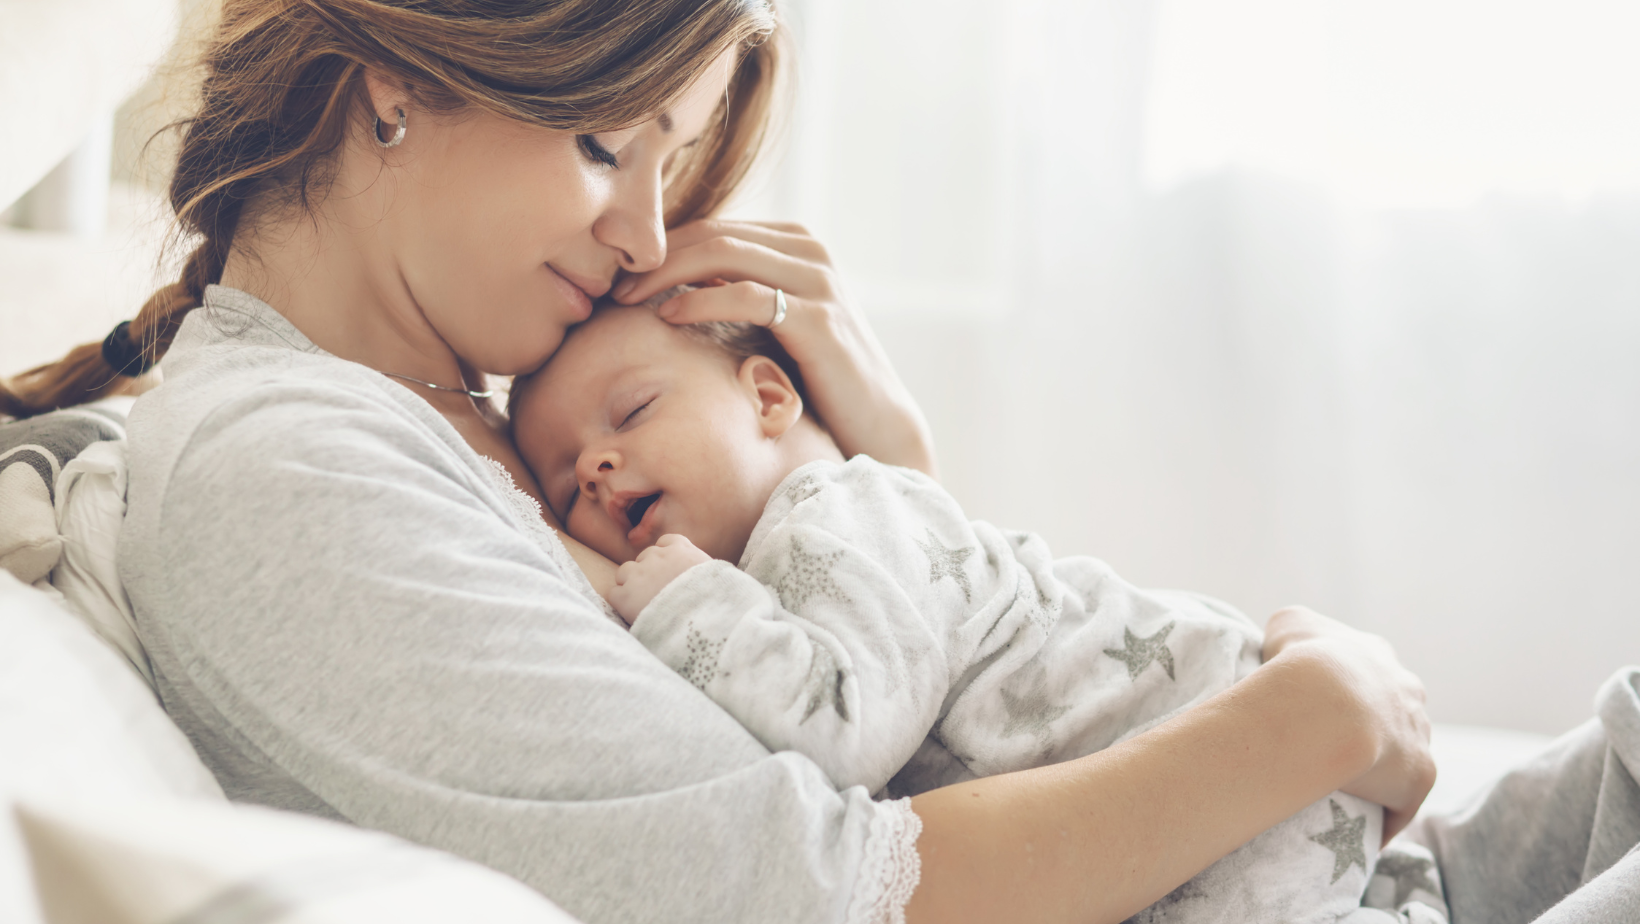 Postpartum Anxiety: The #1 Reason That I’m Afraid To Have Another Baby